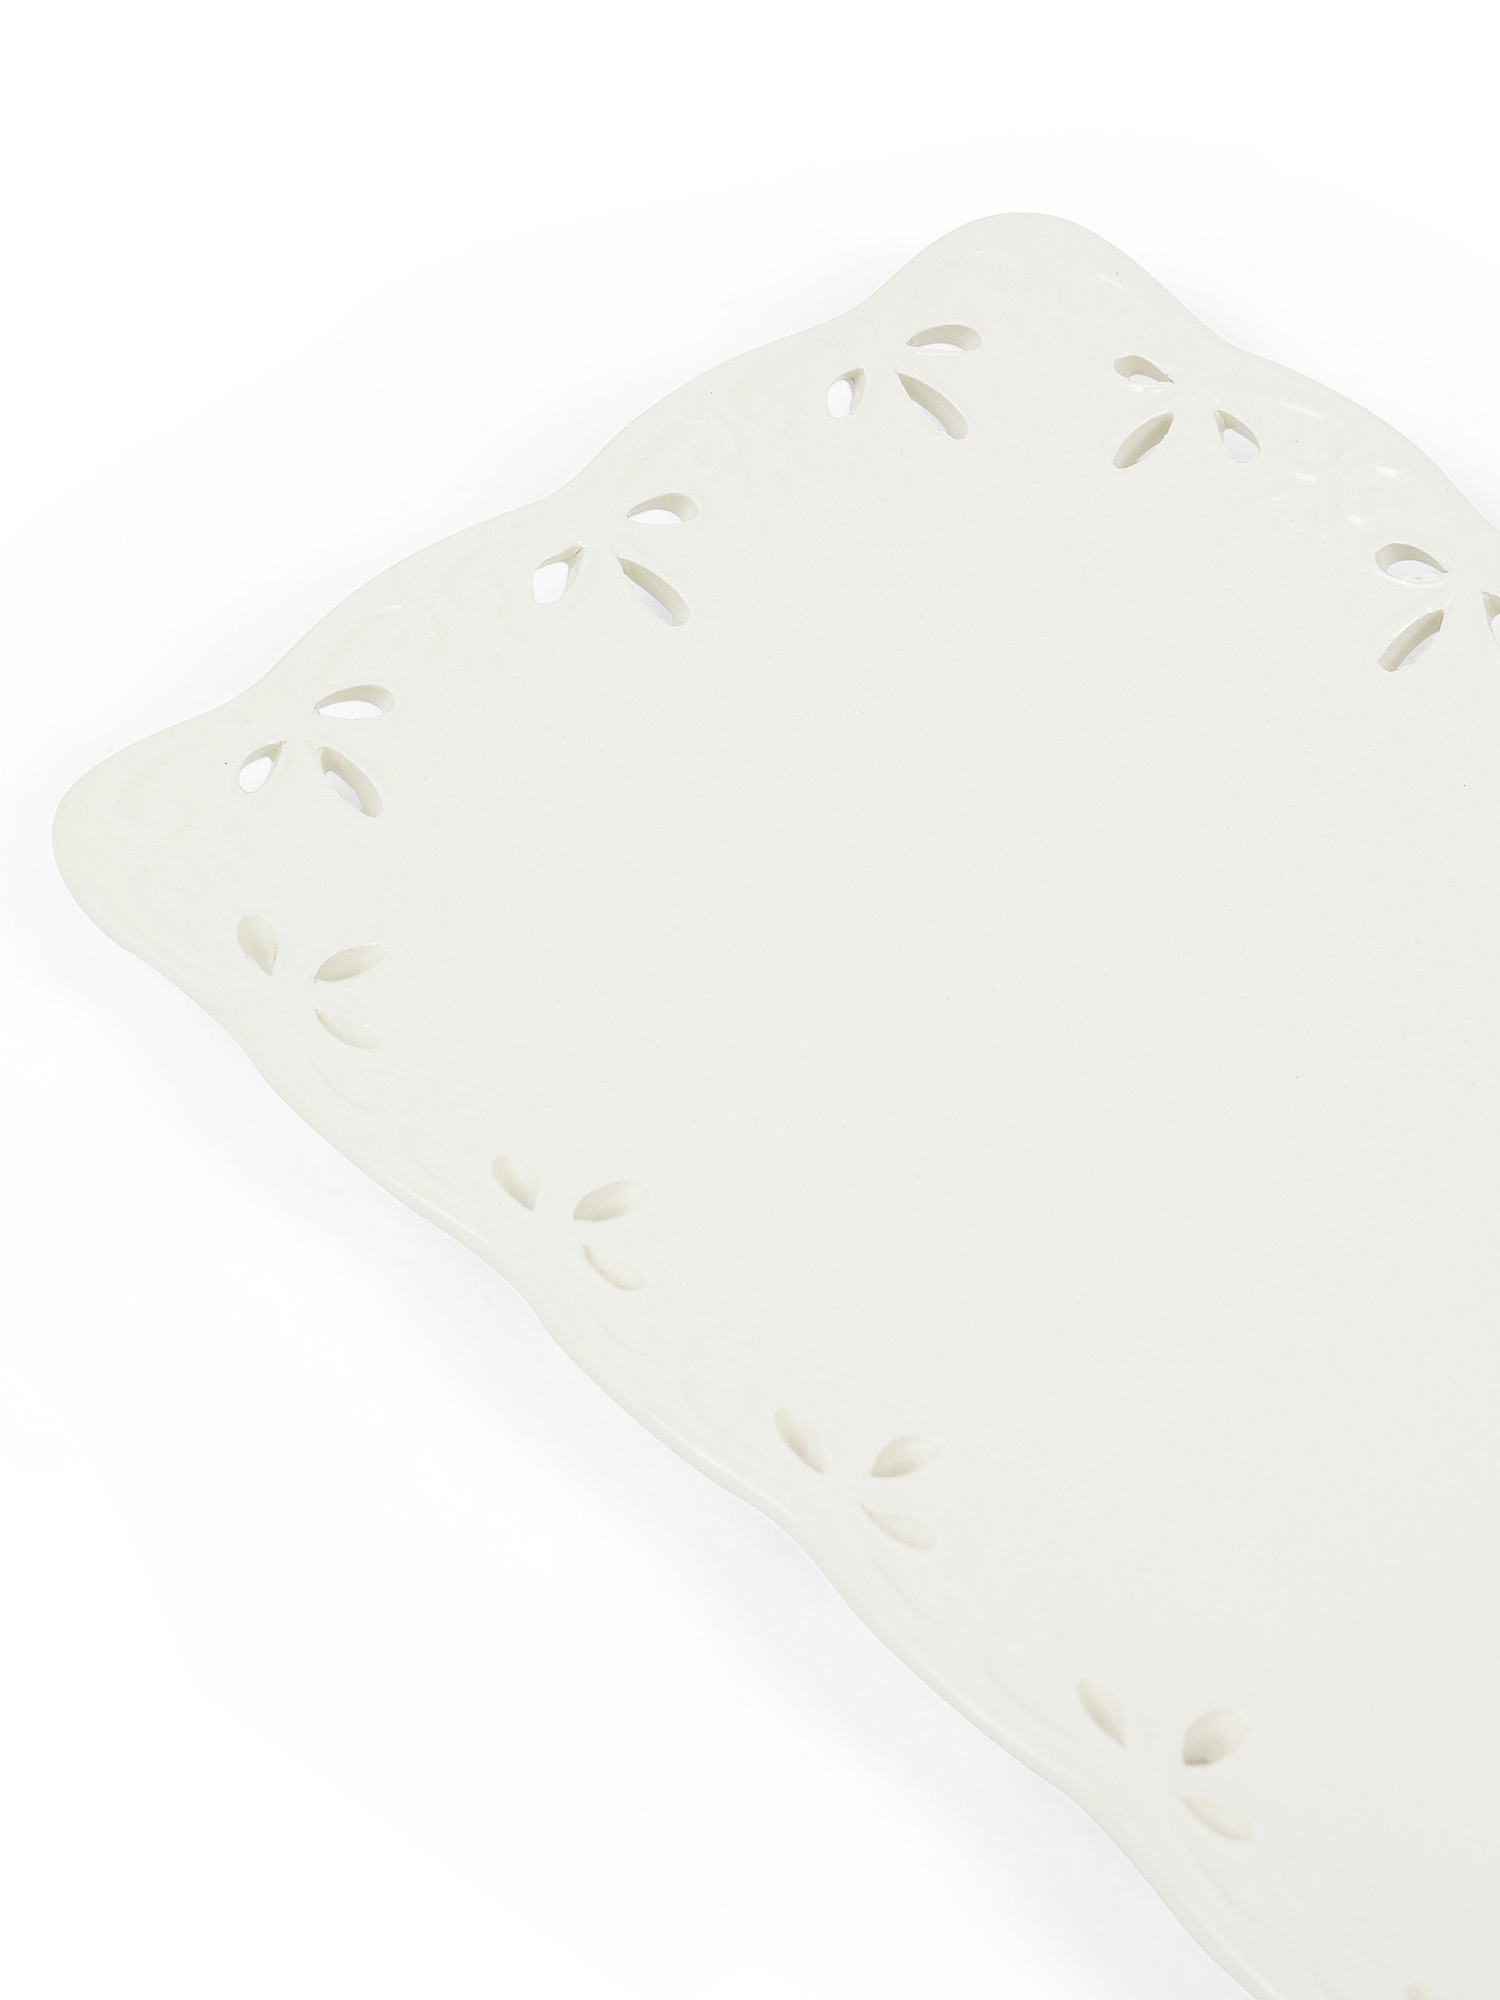 Perforated ceramic tray, White, large image number 1